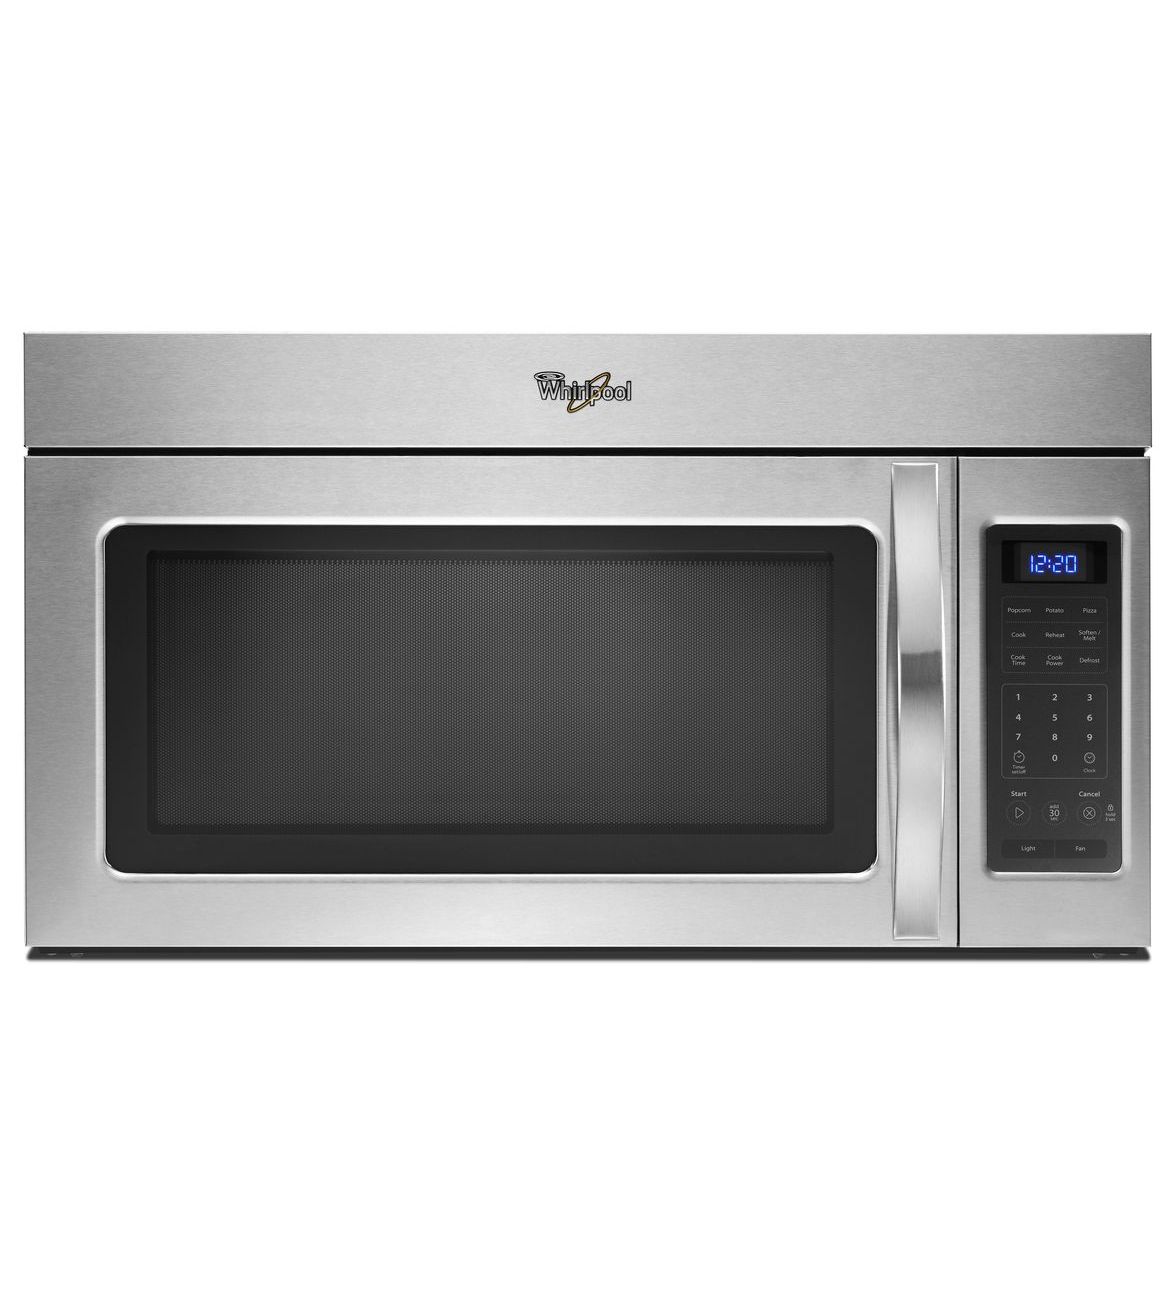 MMV5220FZ Maytag Over the Range Microwave, Vent, WideGlide Tray Stainless Steel